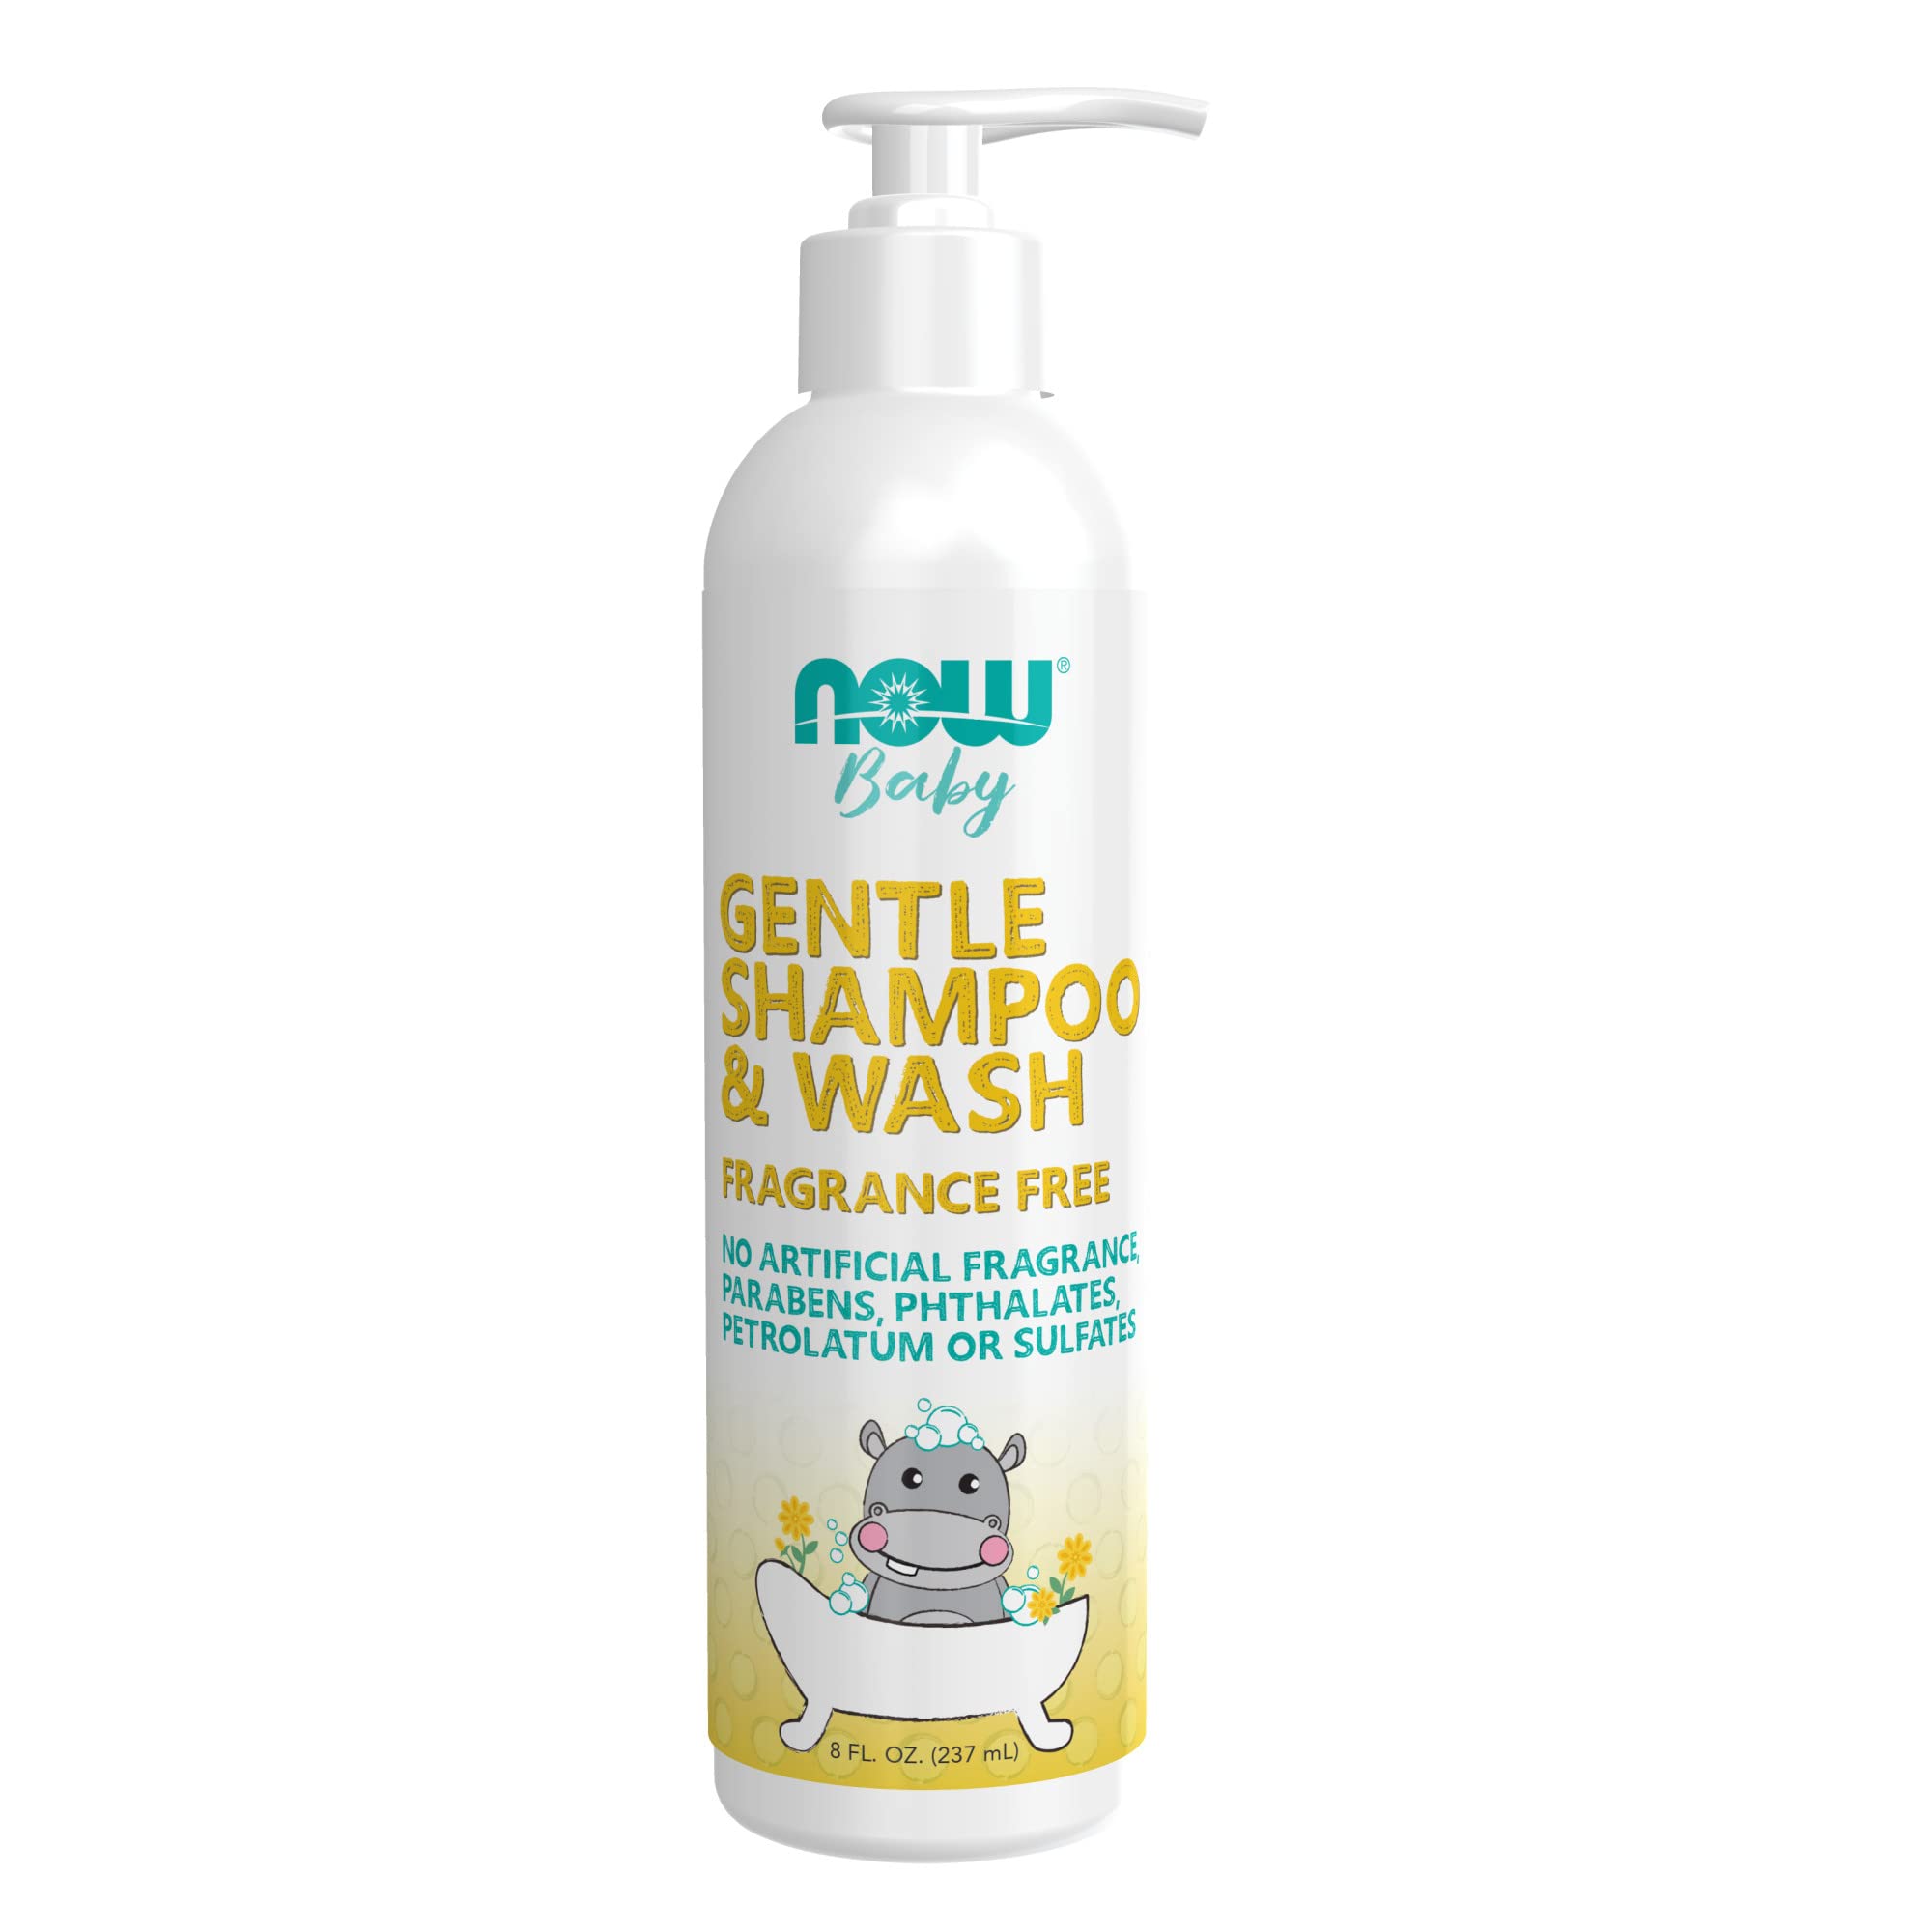 NOW Baby, Gentle Shampoo & Wash, Fragrance Free with No Artificial Fragrance, Parabens, Phthalates, Petrolatum or Sulfates, 8-Ounce